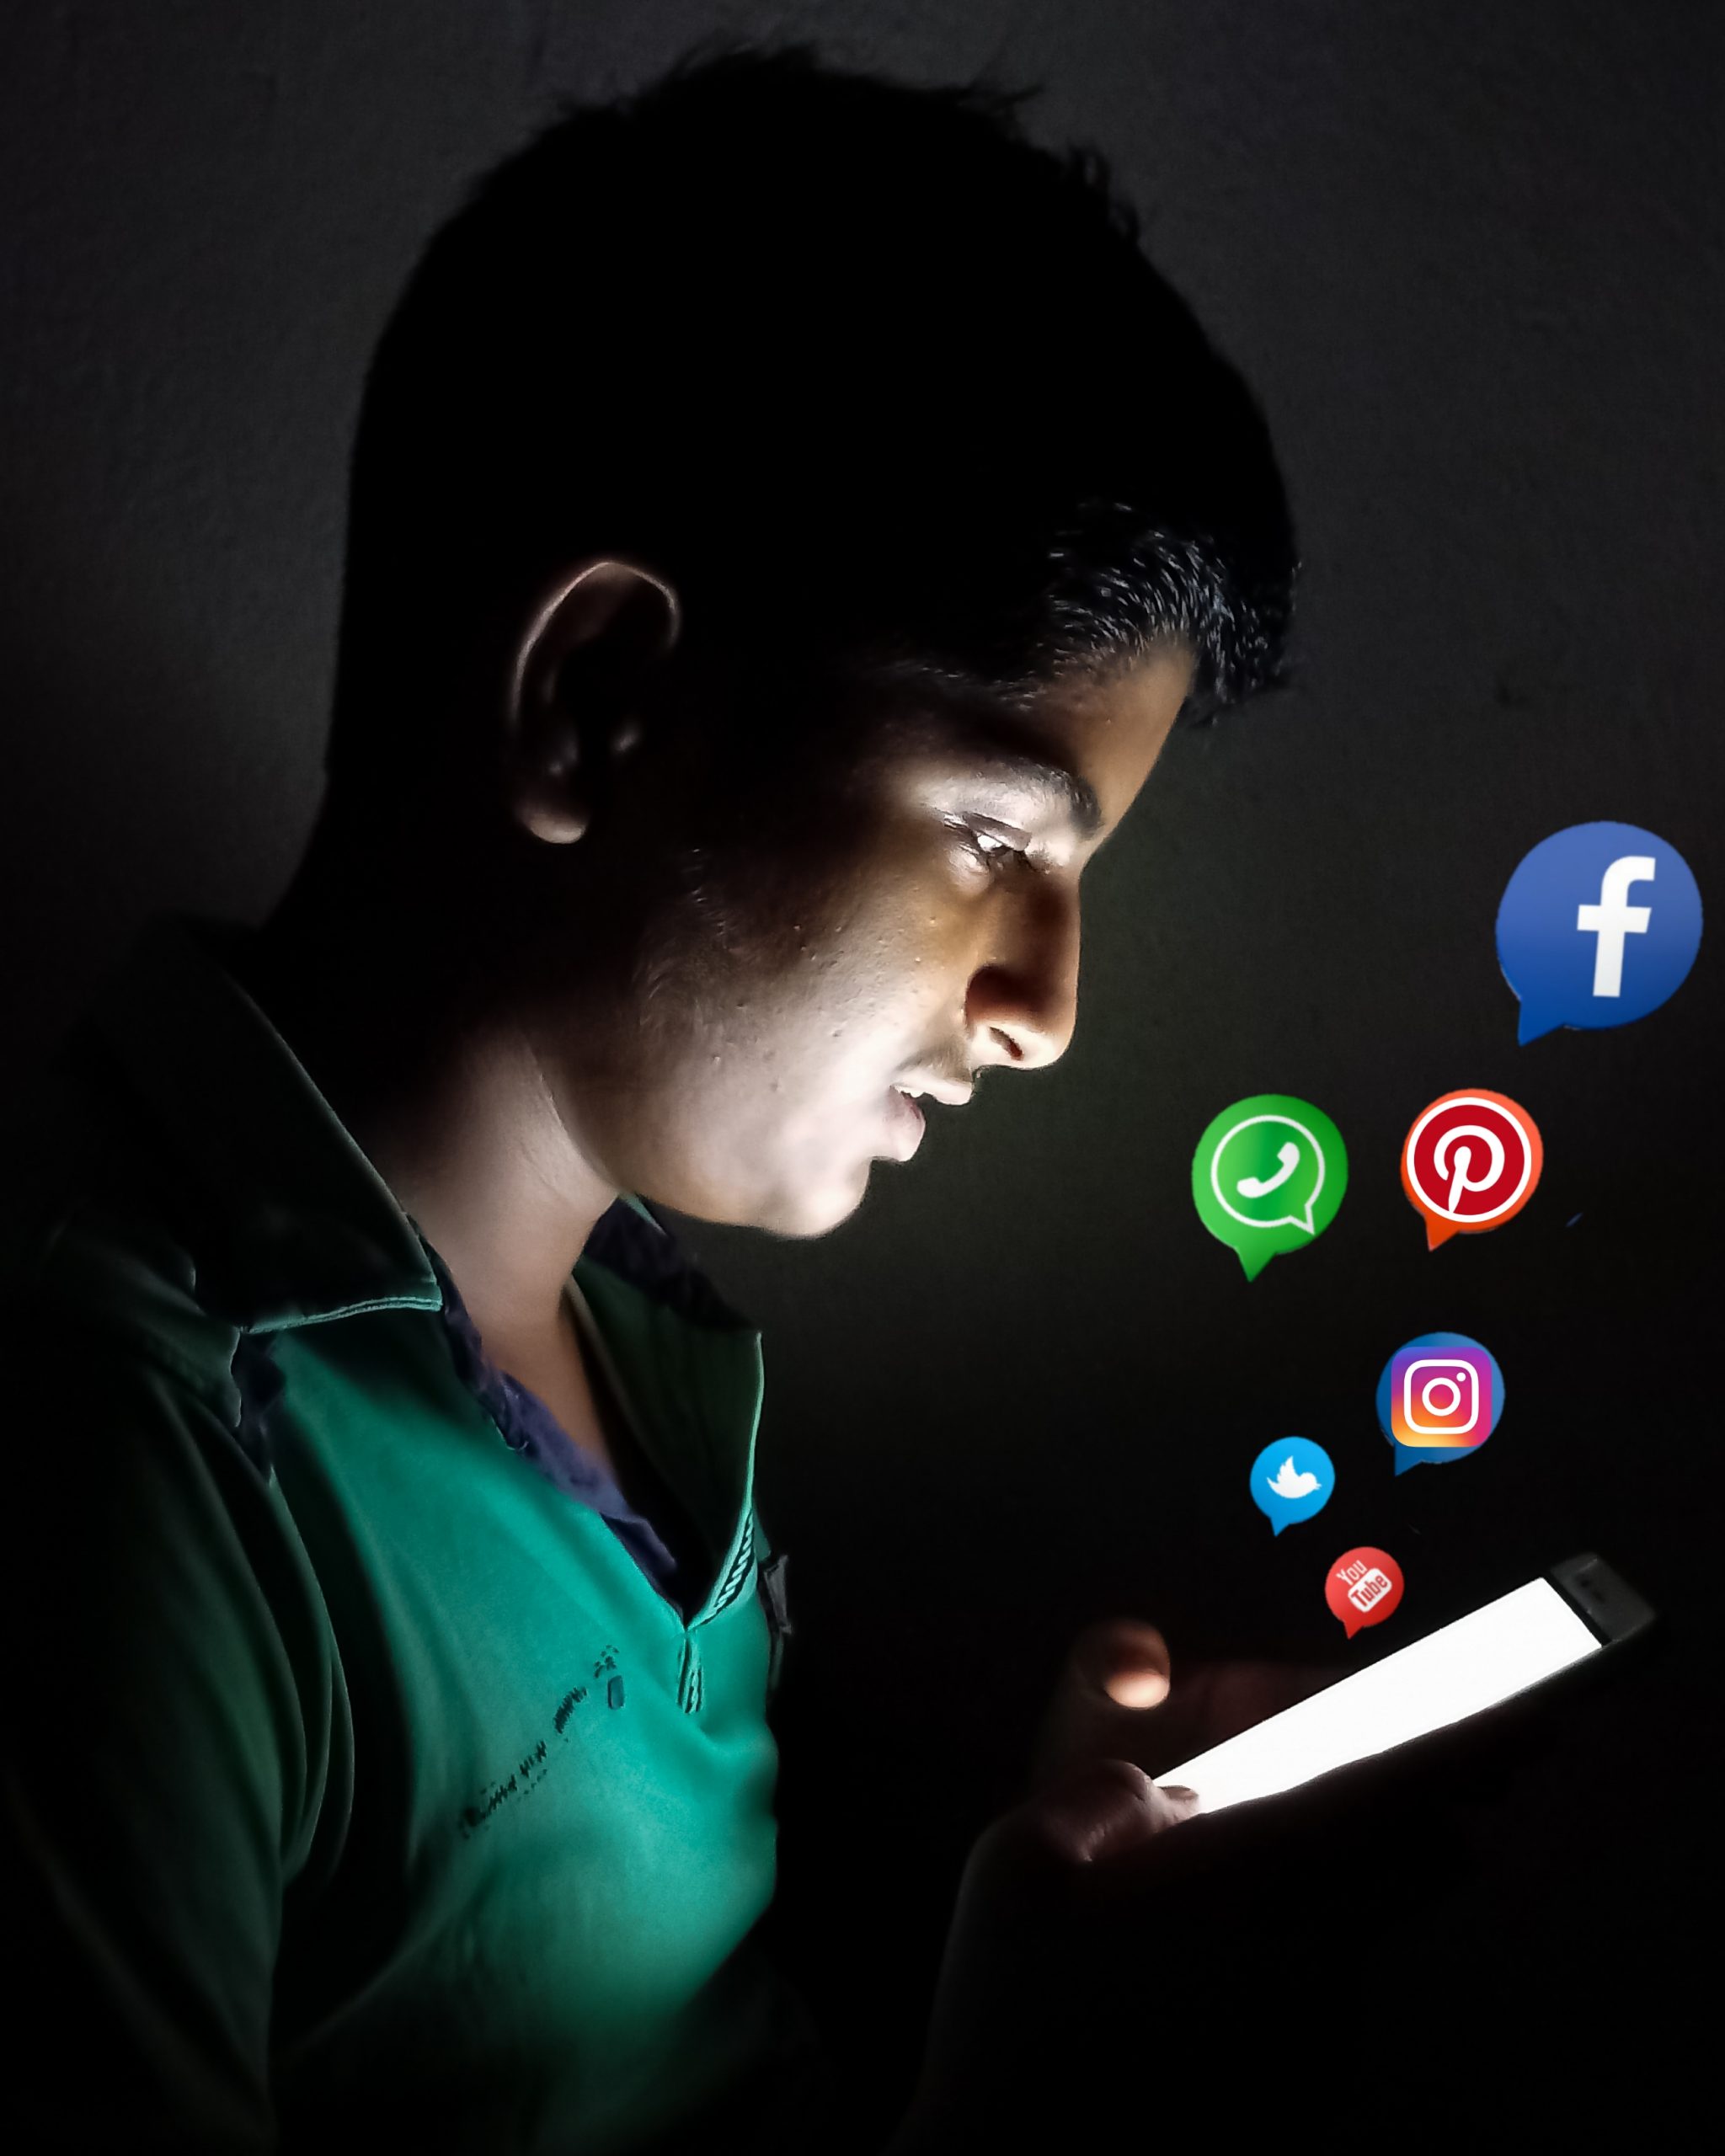 A boy addicted to social media apps